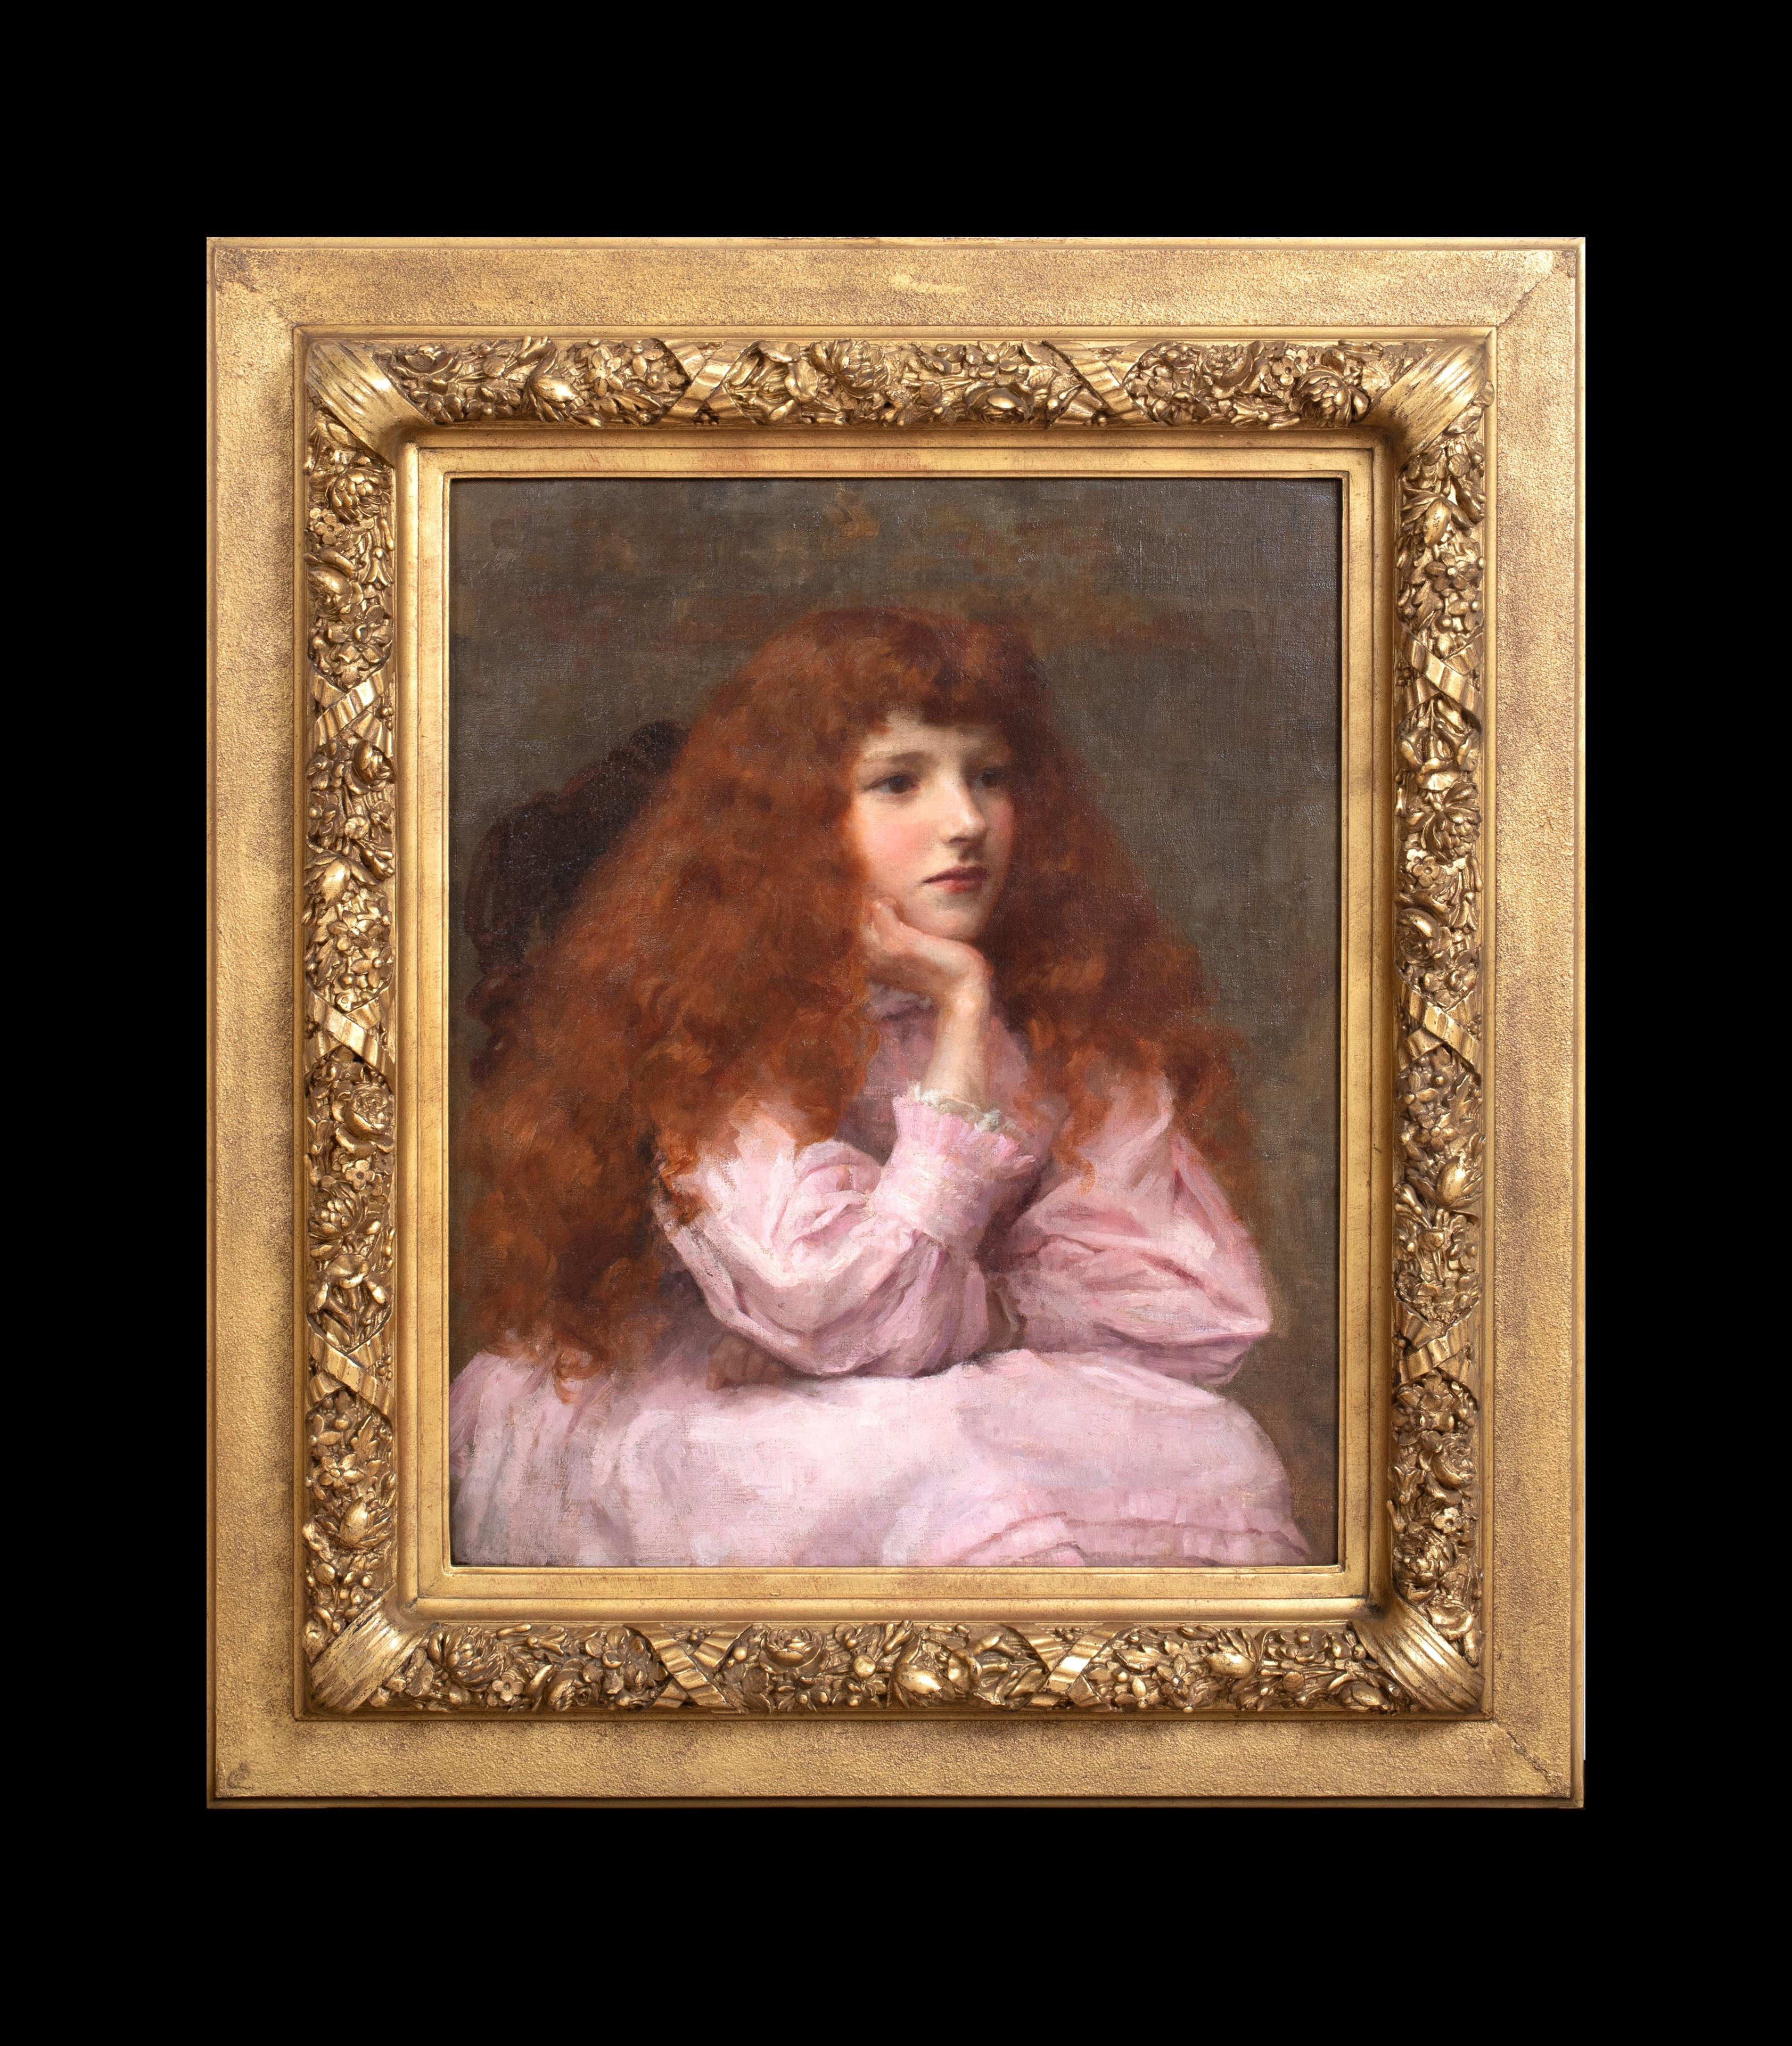 Portrait Of A Redhaired Girl In Pink, 19th Century  George Sheridan KNOWLES  - Painting by George Sheridan Knowles